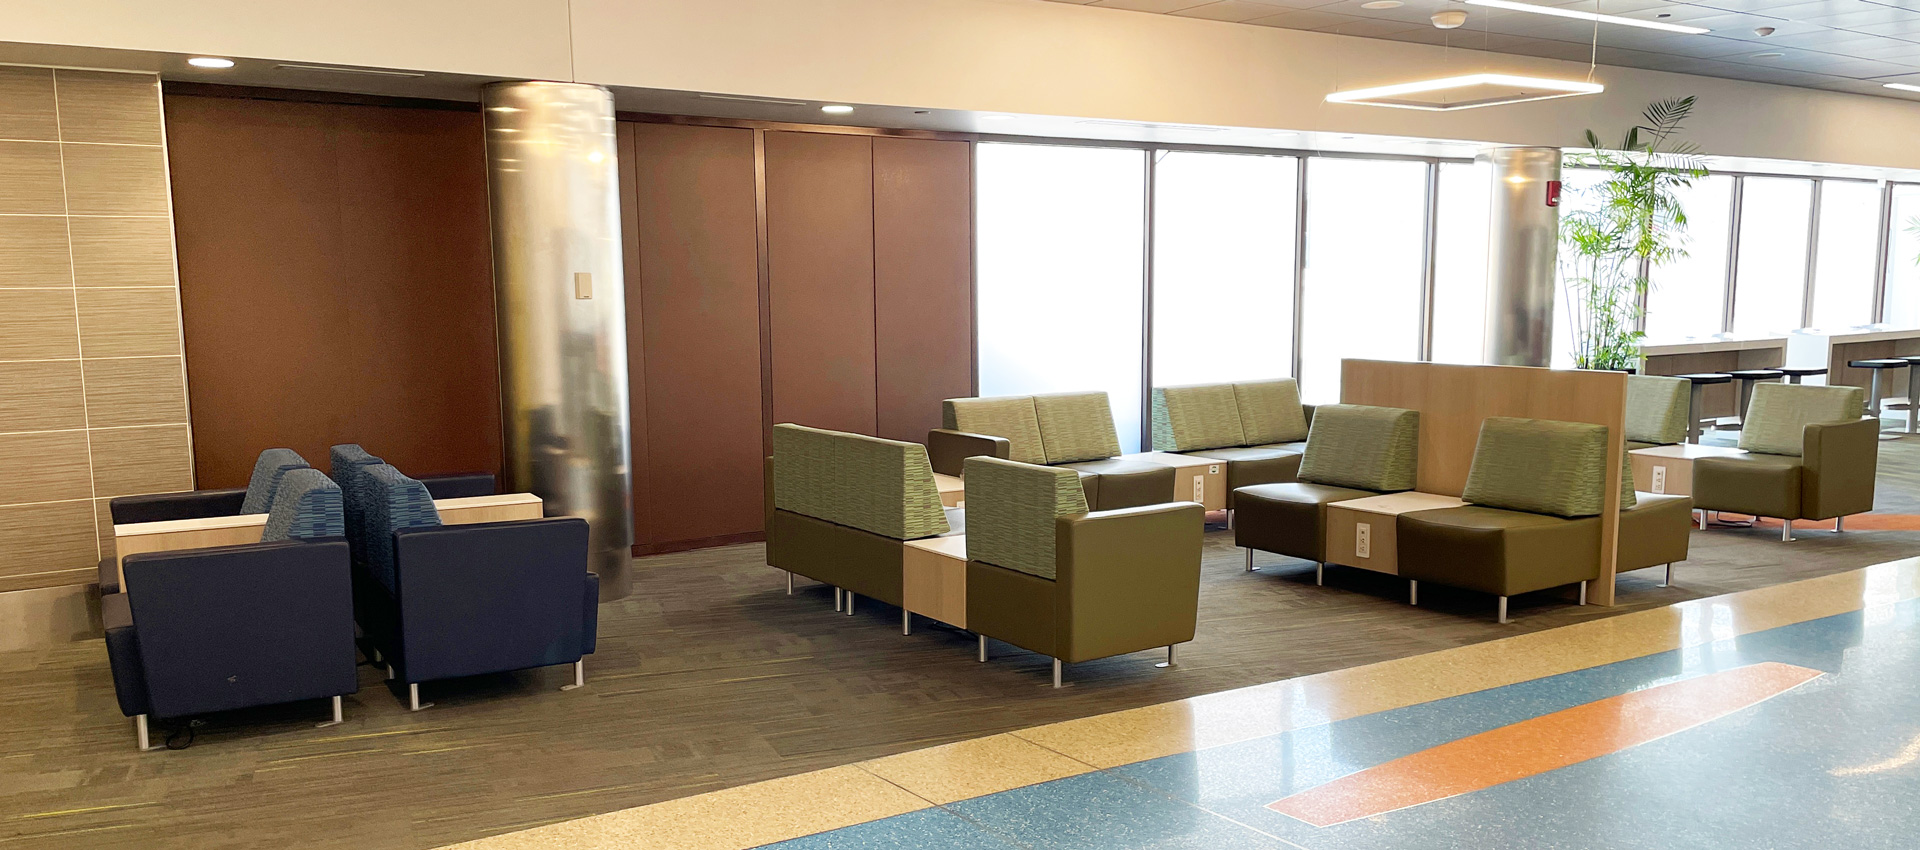 Modular lounge seating configurations with privacy panels in Boston Logan Airport